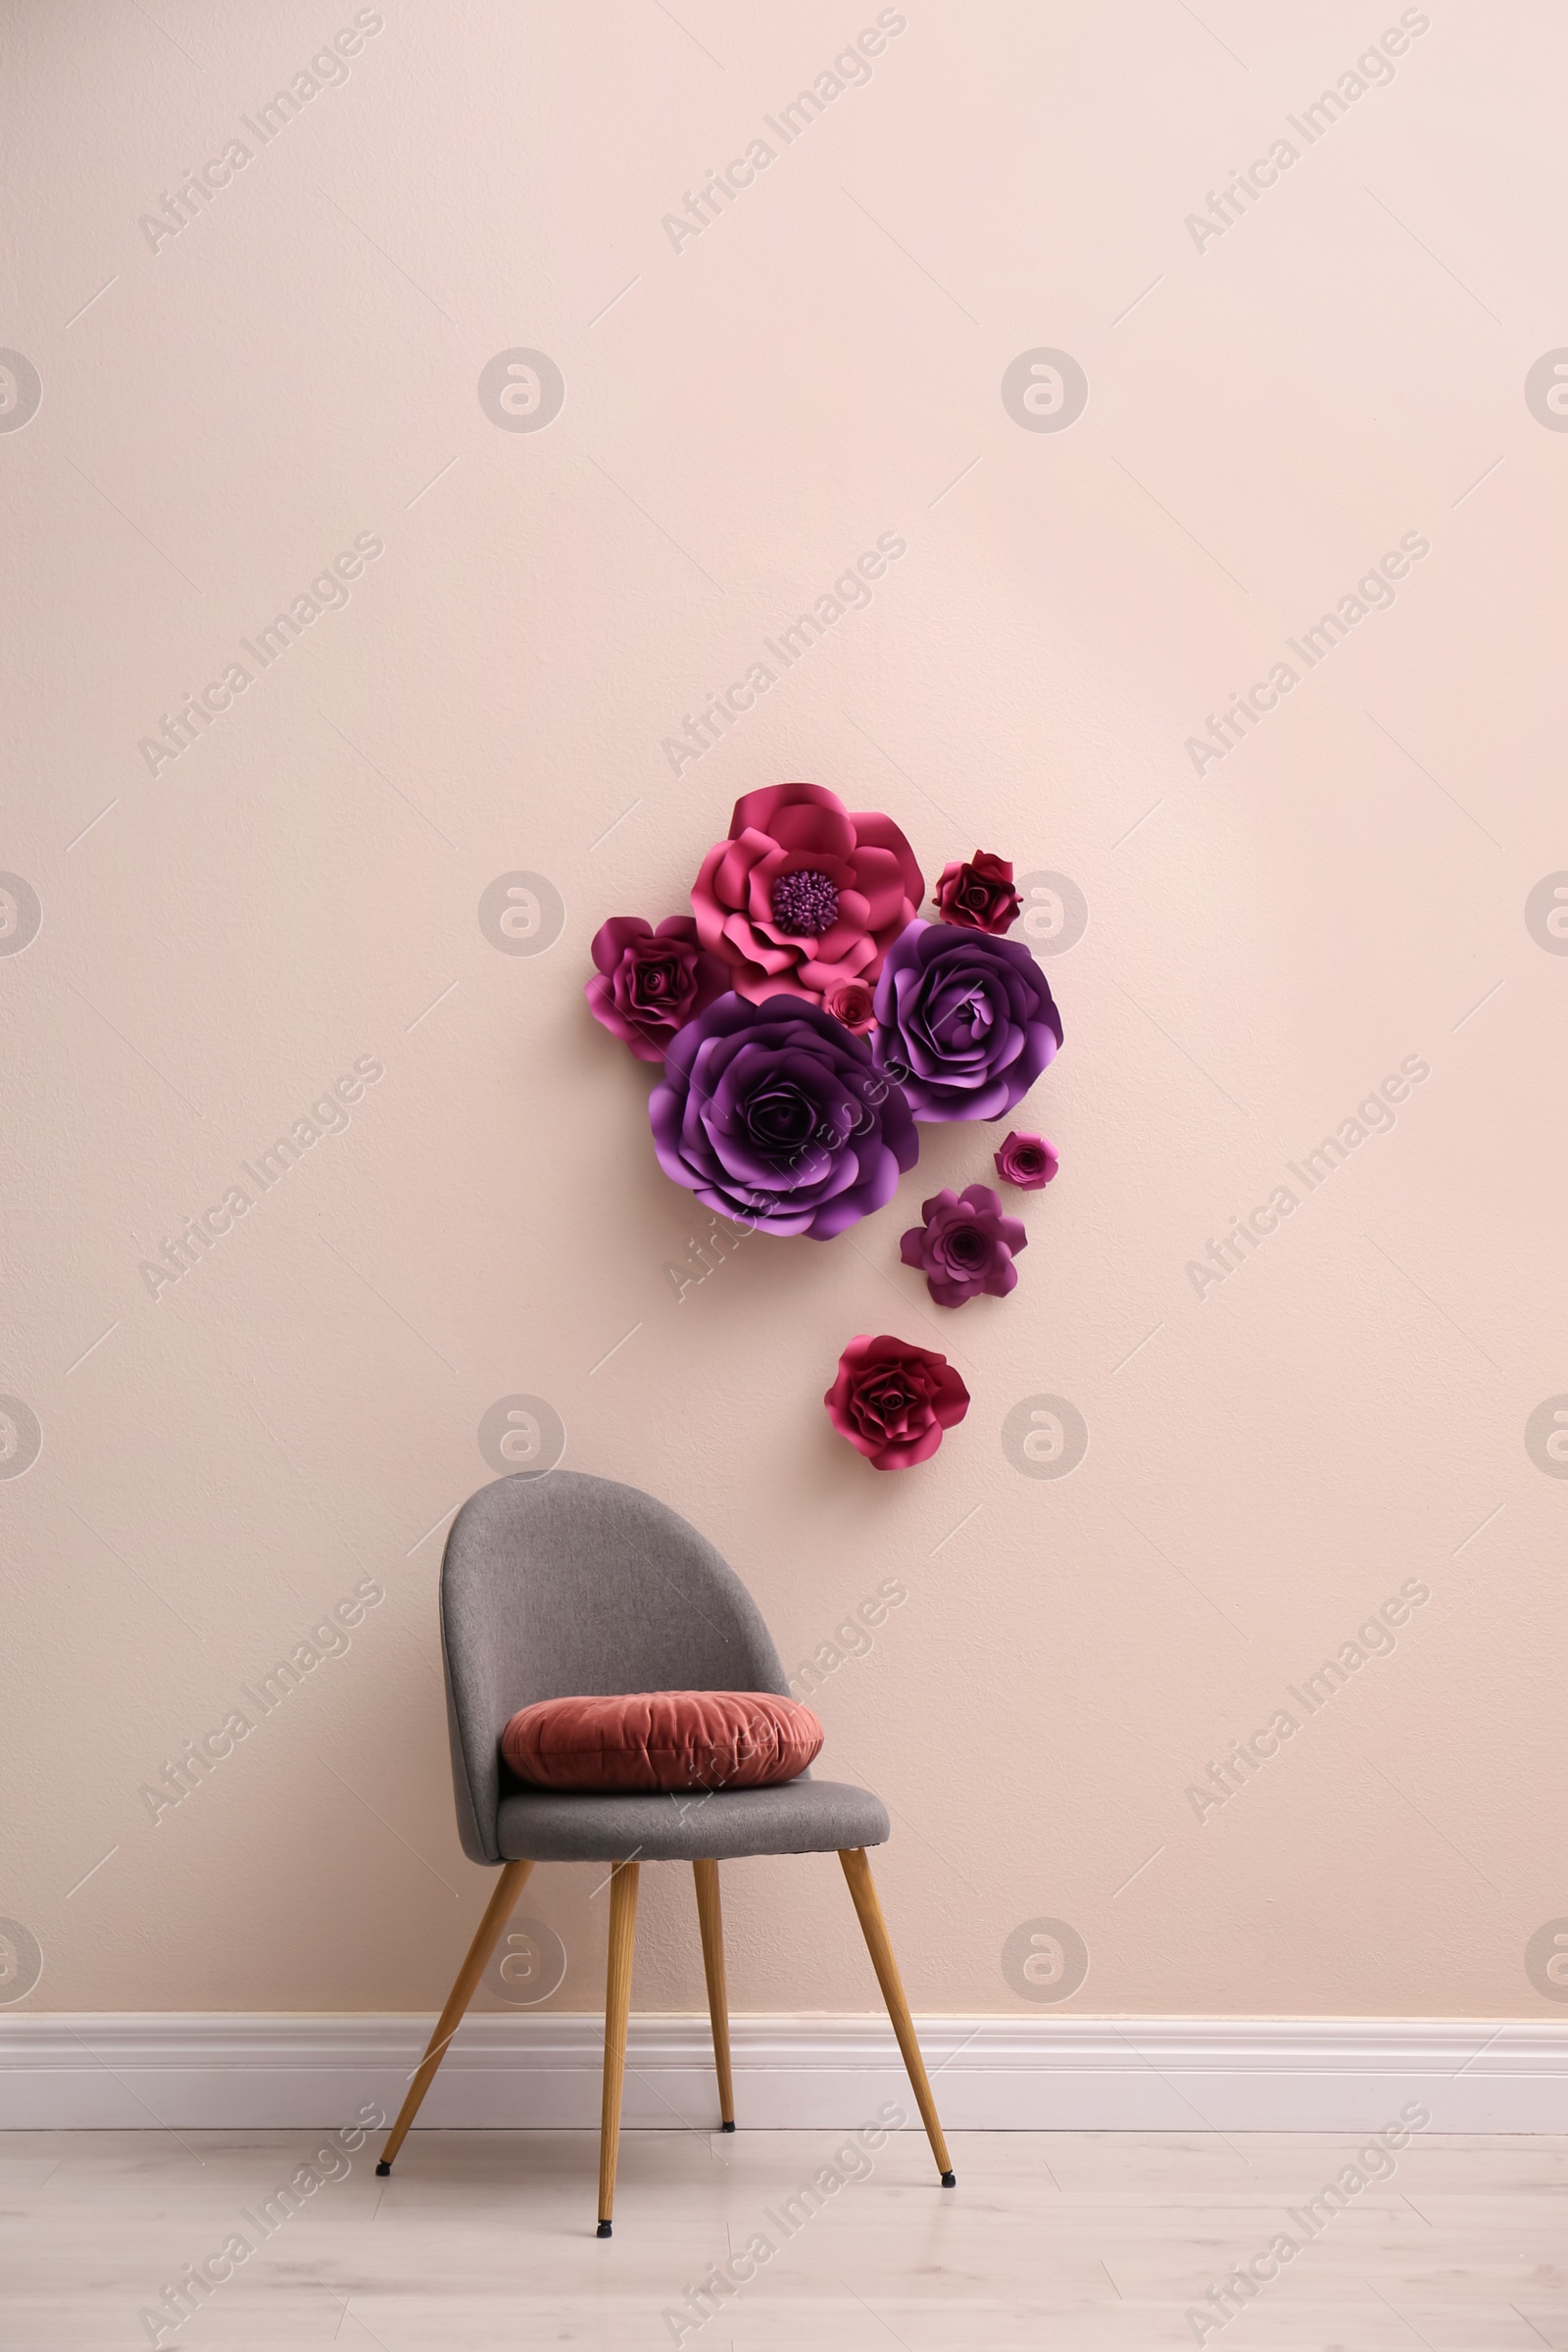 Photo of Chair near wall with floral decor in room. Interior design